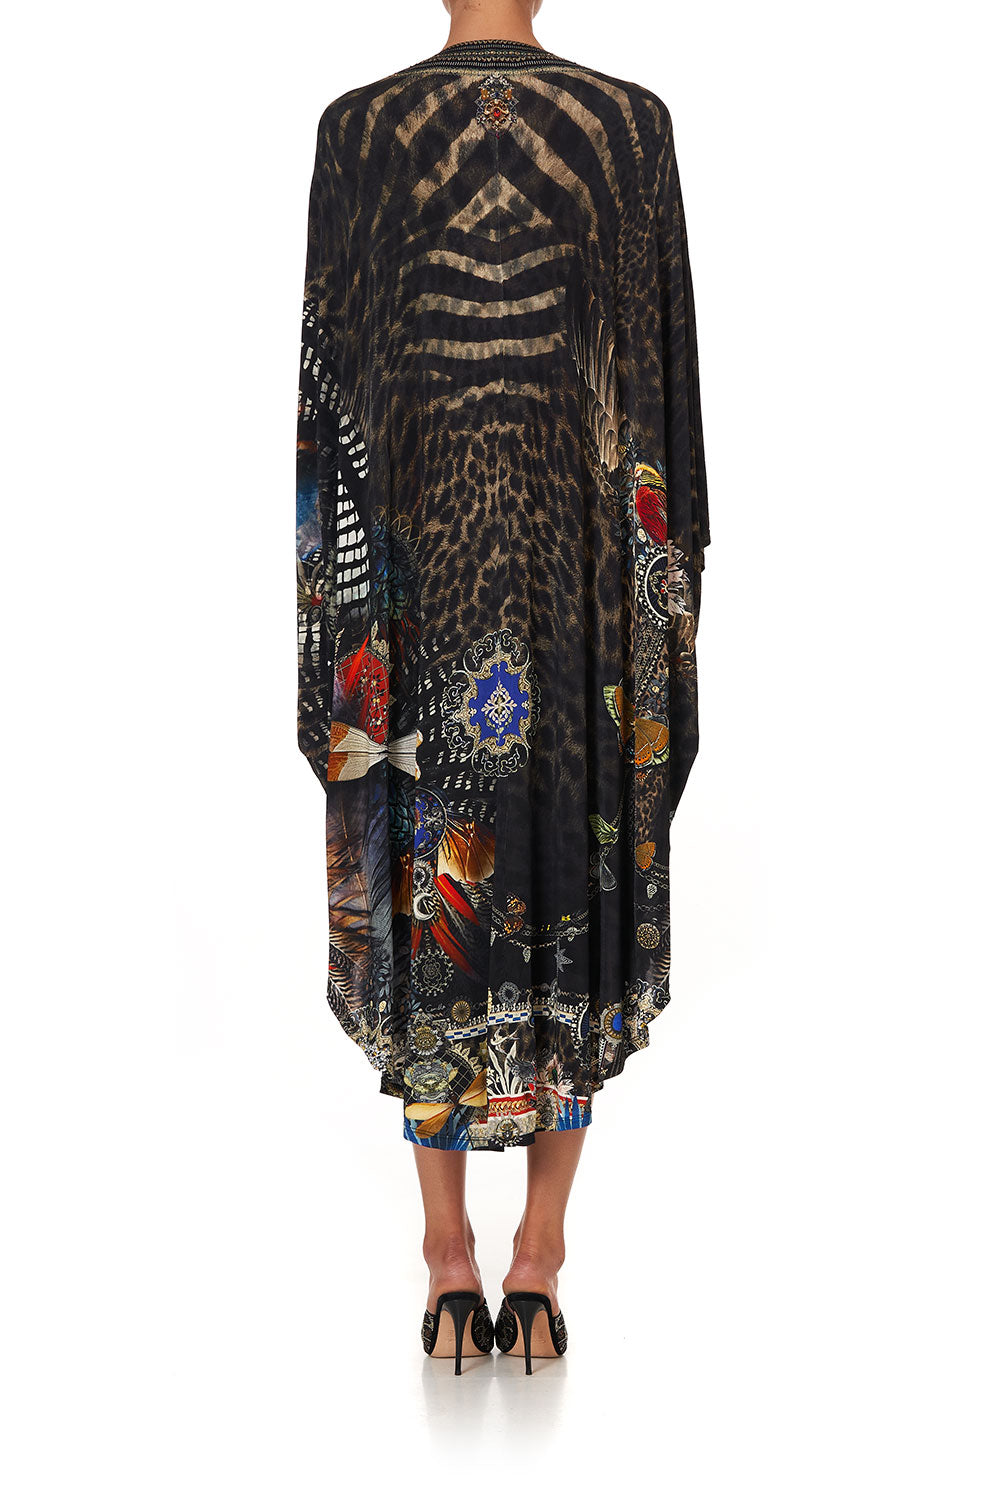 JERSEY LONG KAFTAN WITH ROUNDED HEM TREASURE CHASER